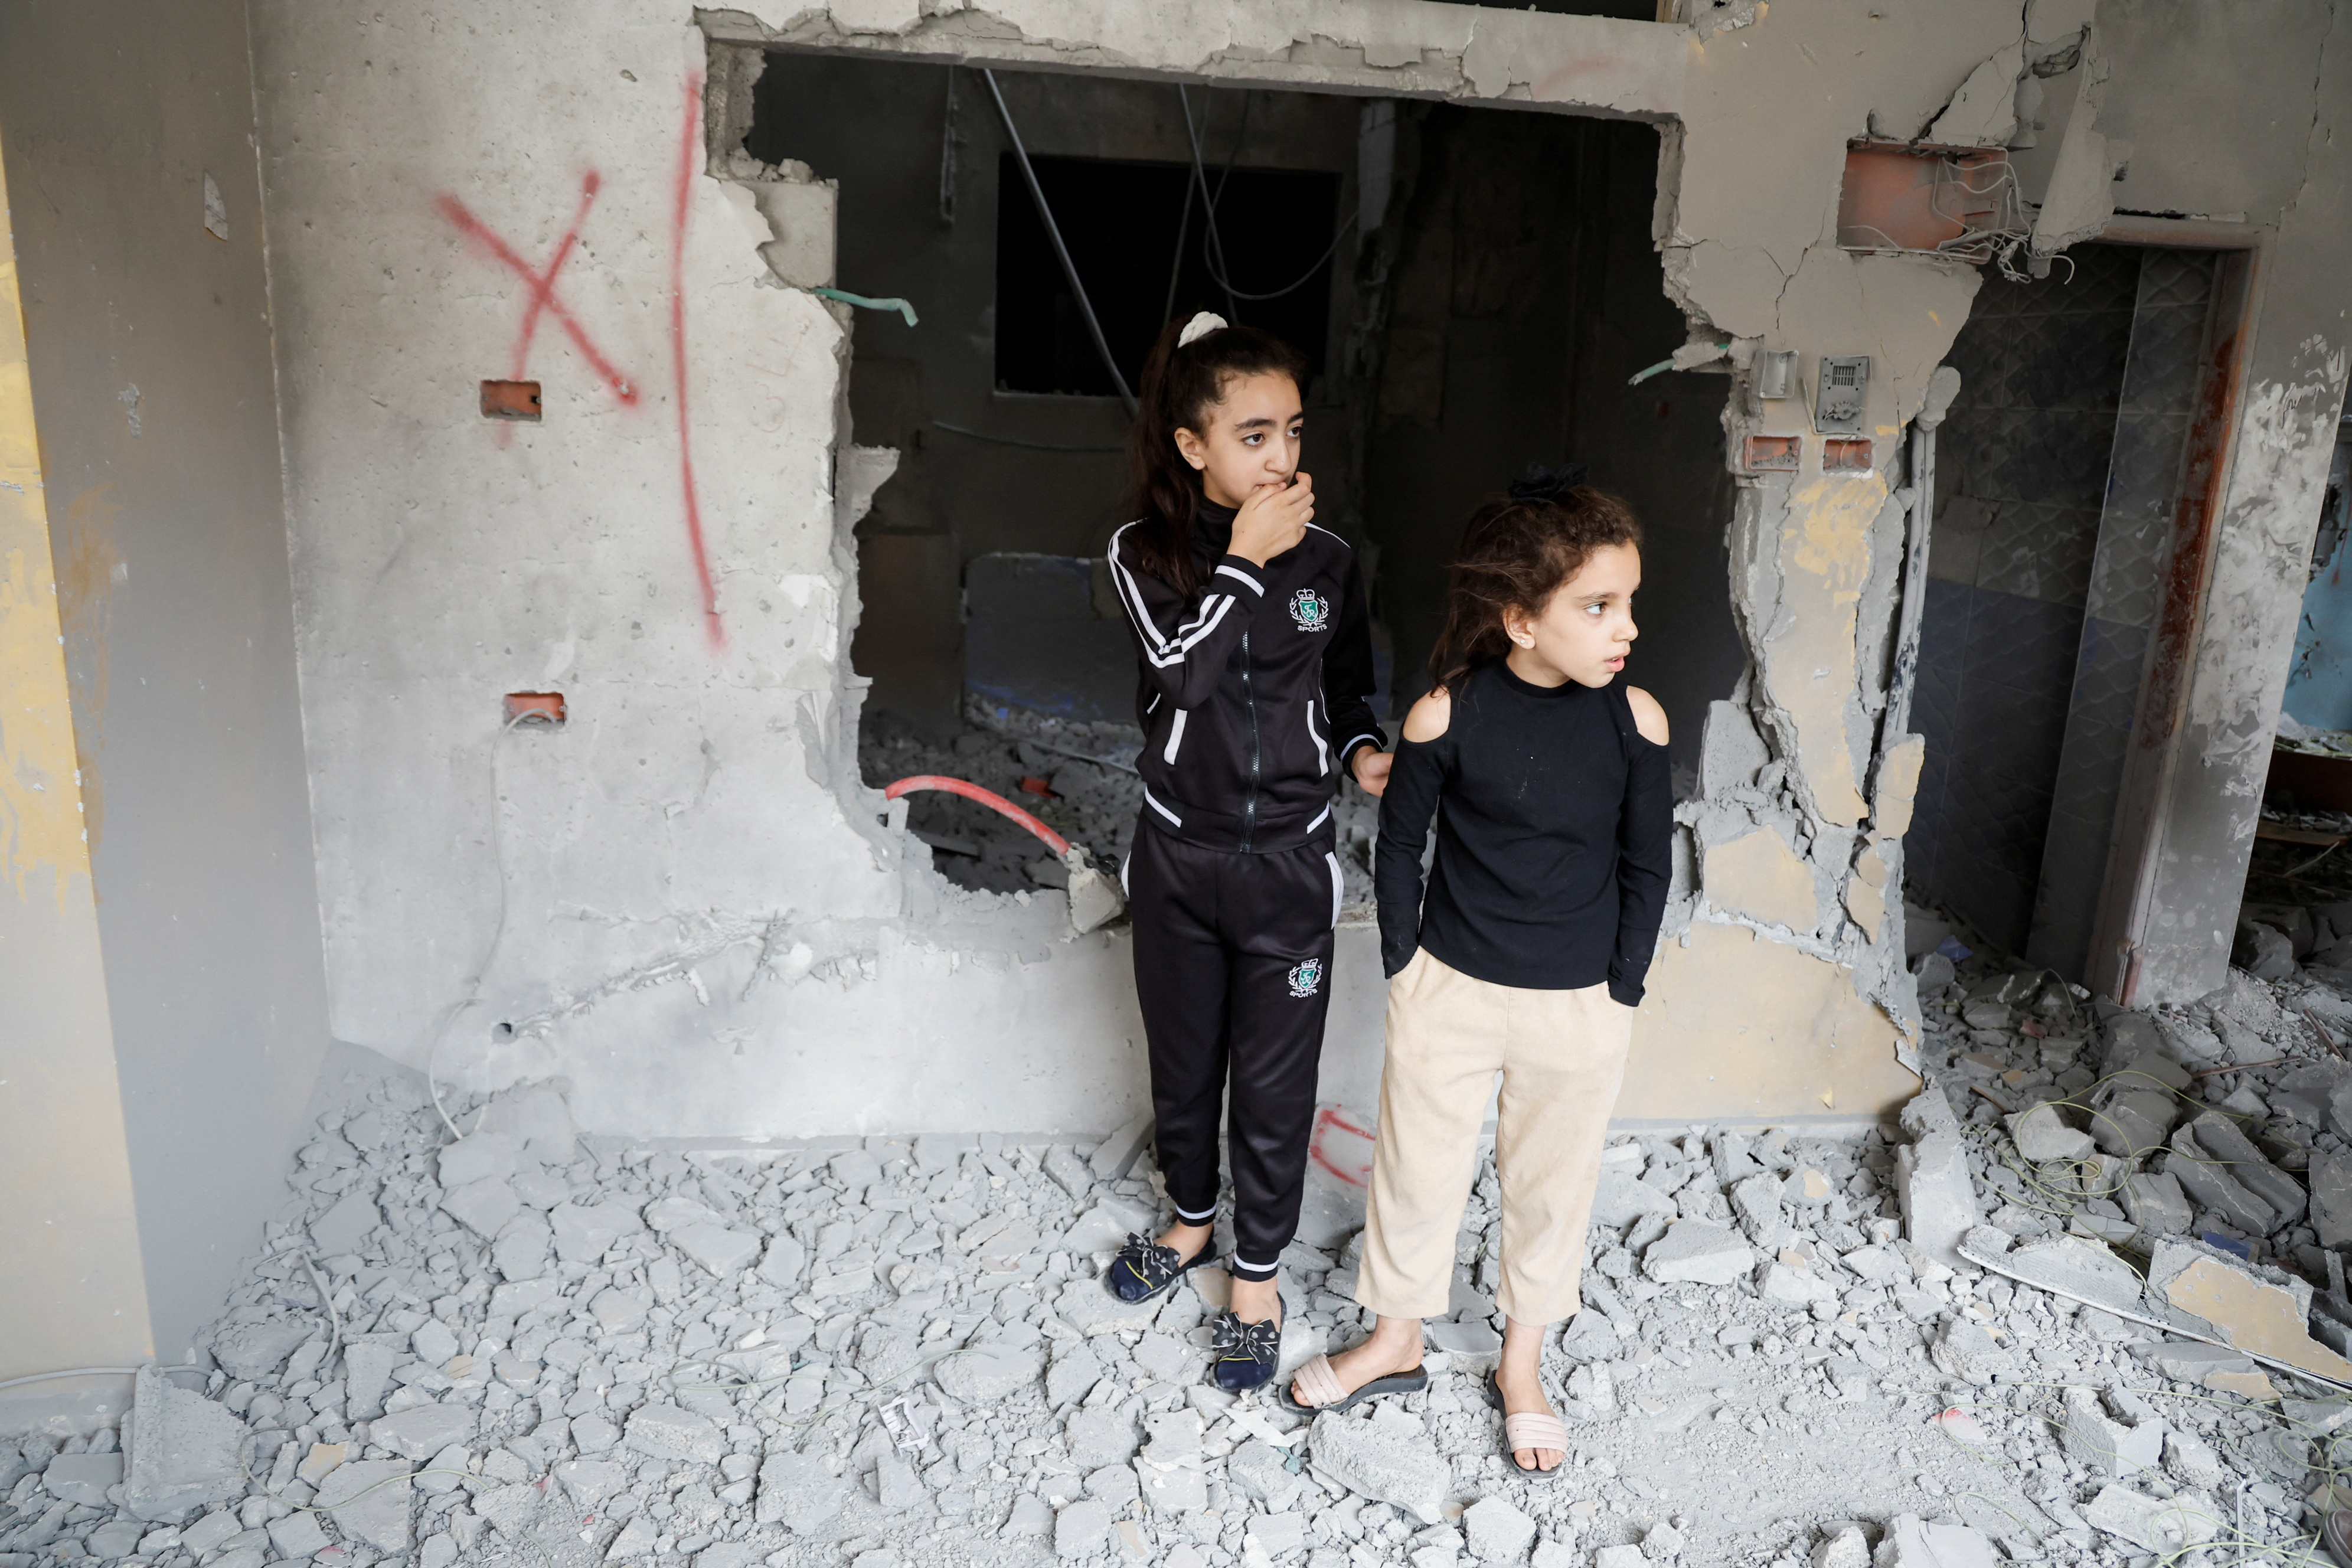 Palestinian children react as they check the damage after Israeli troops demolished the house of a Palestinian assailant in Askar refugee camp near Nablus